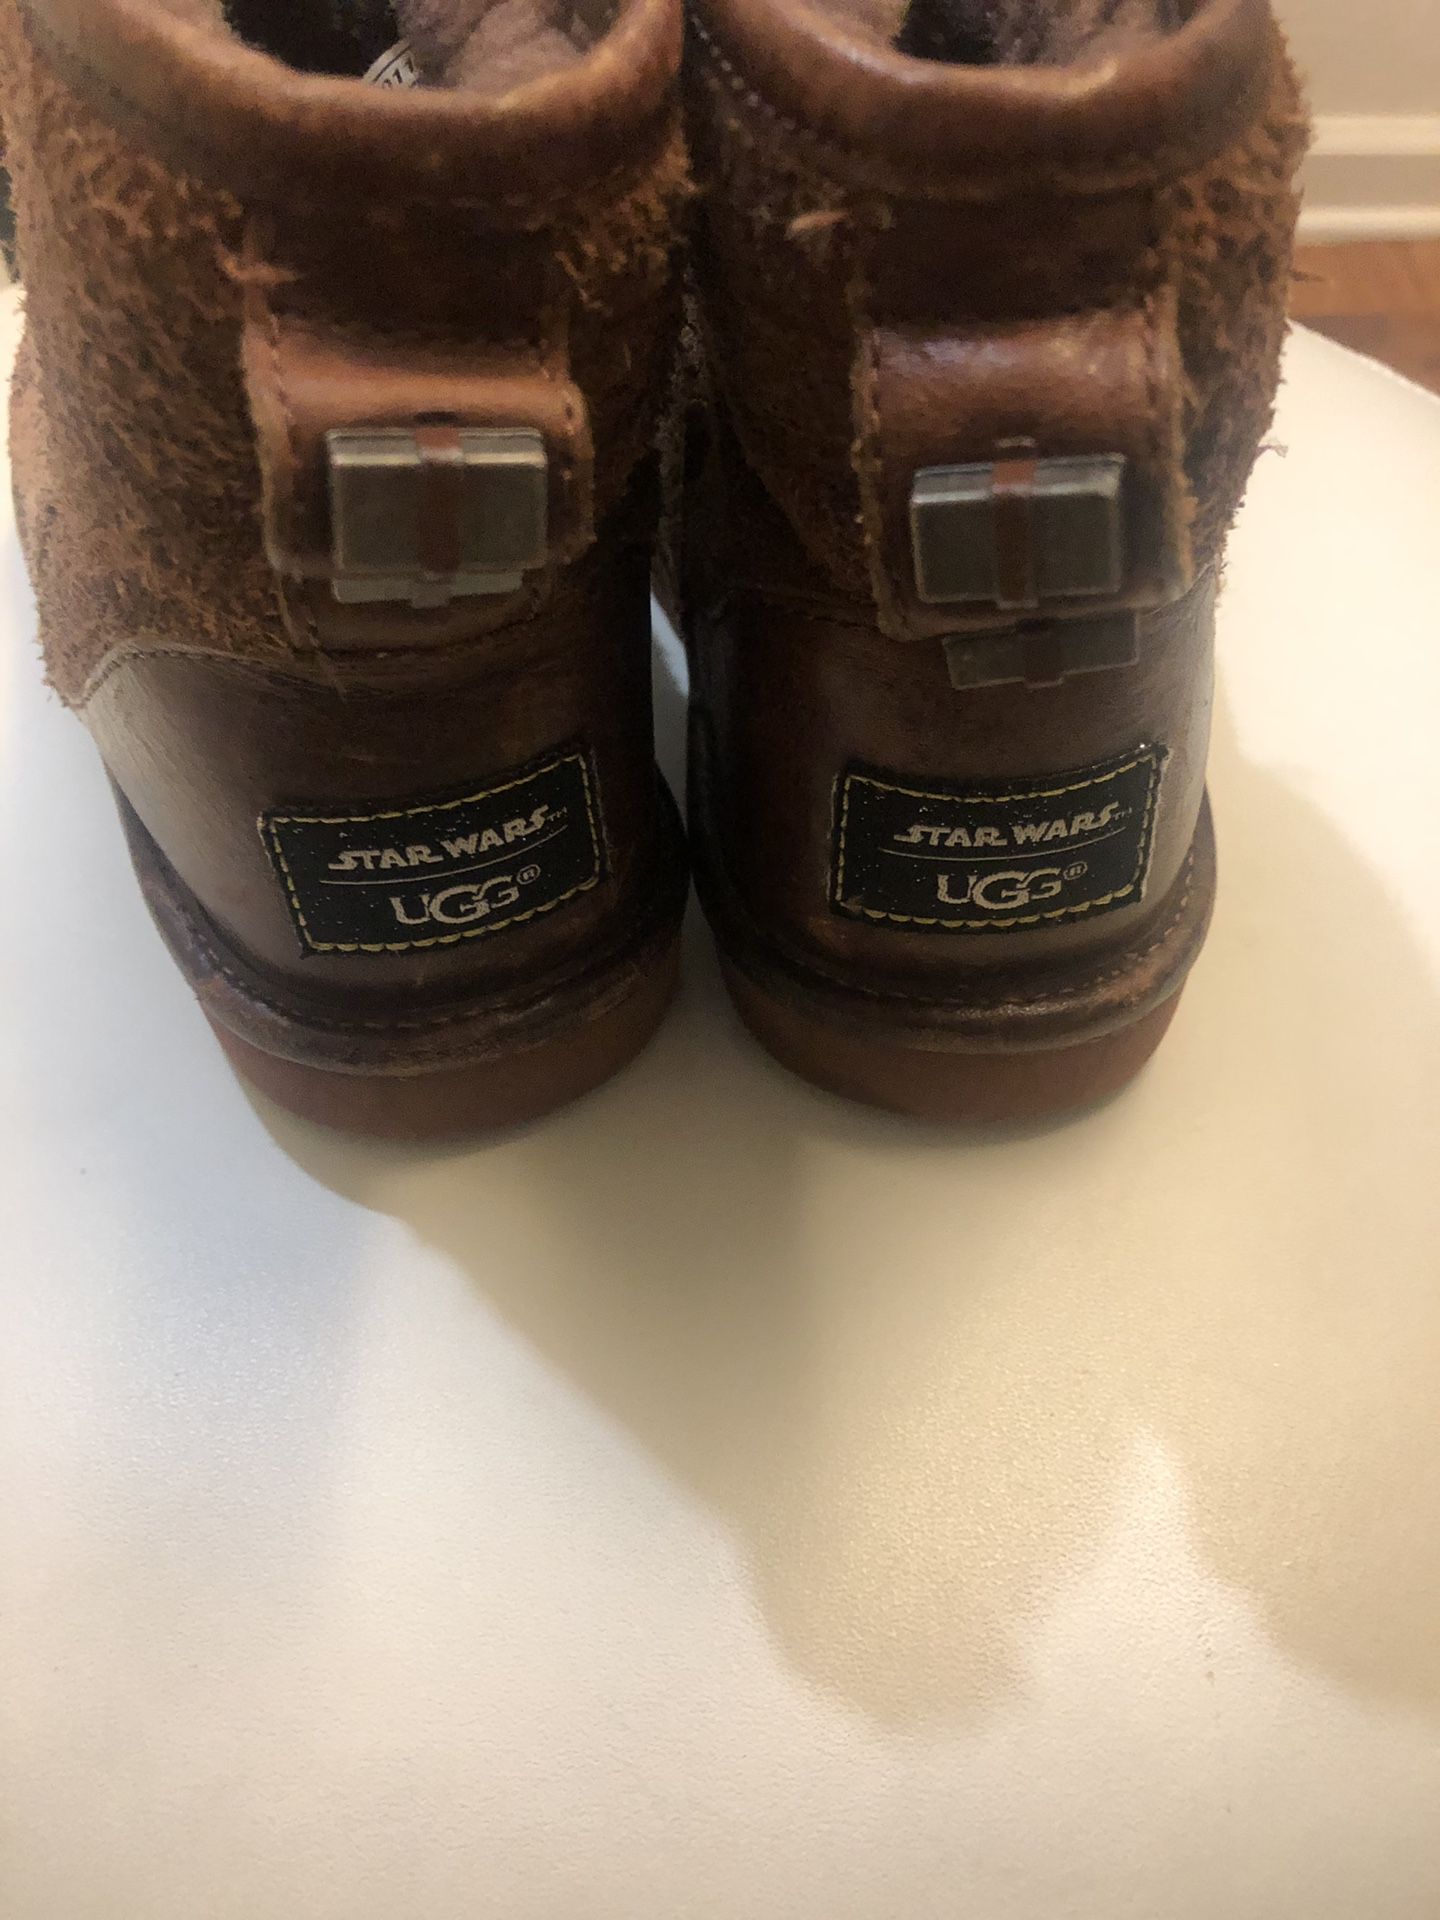 Ugg boots size 1 real girls